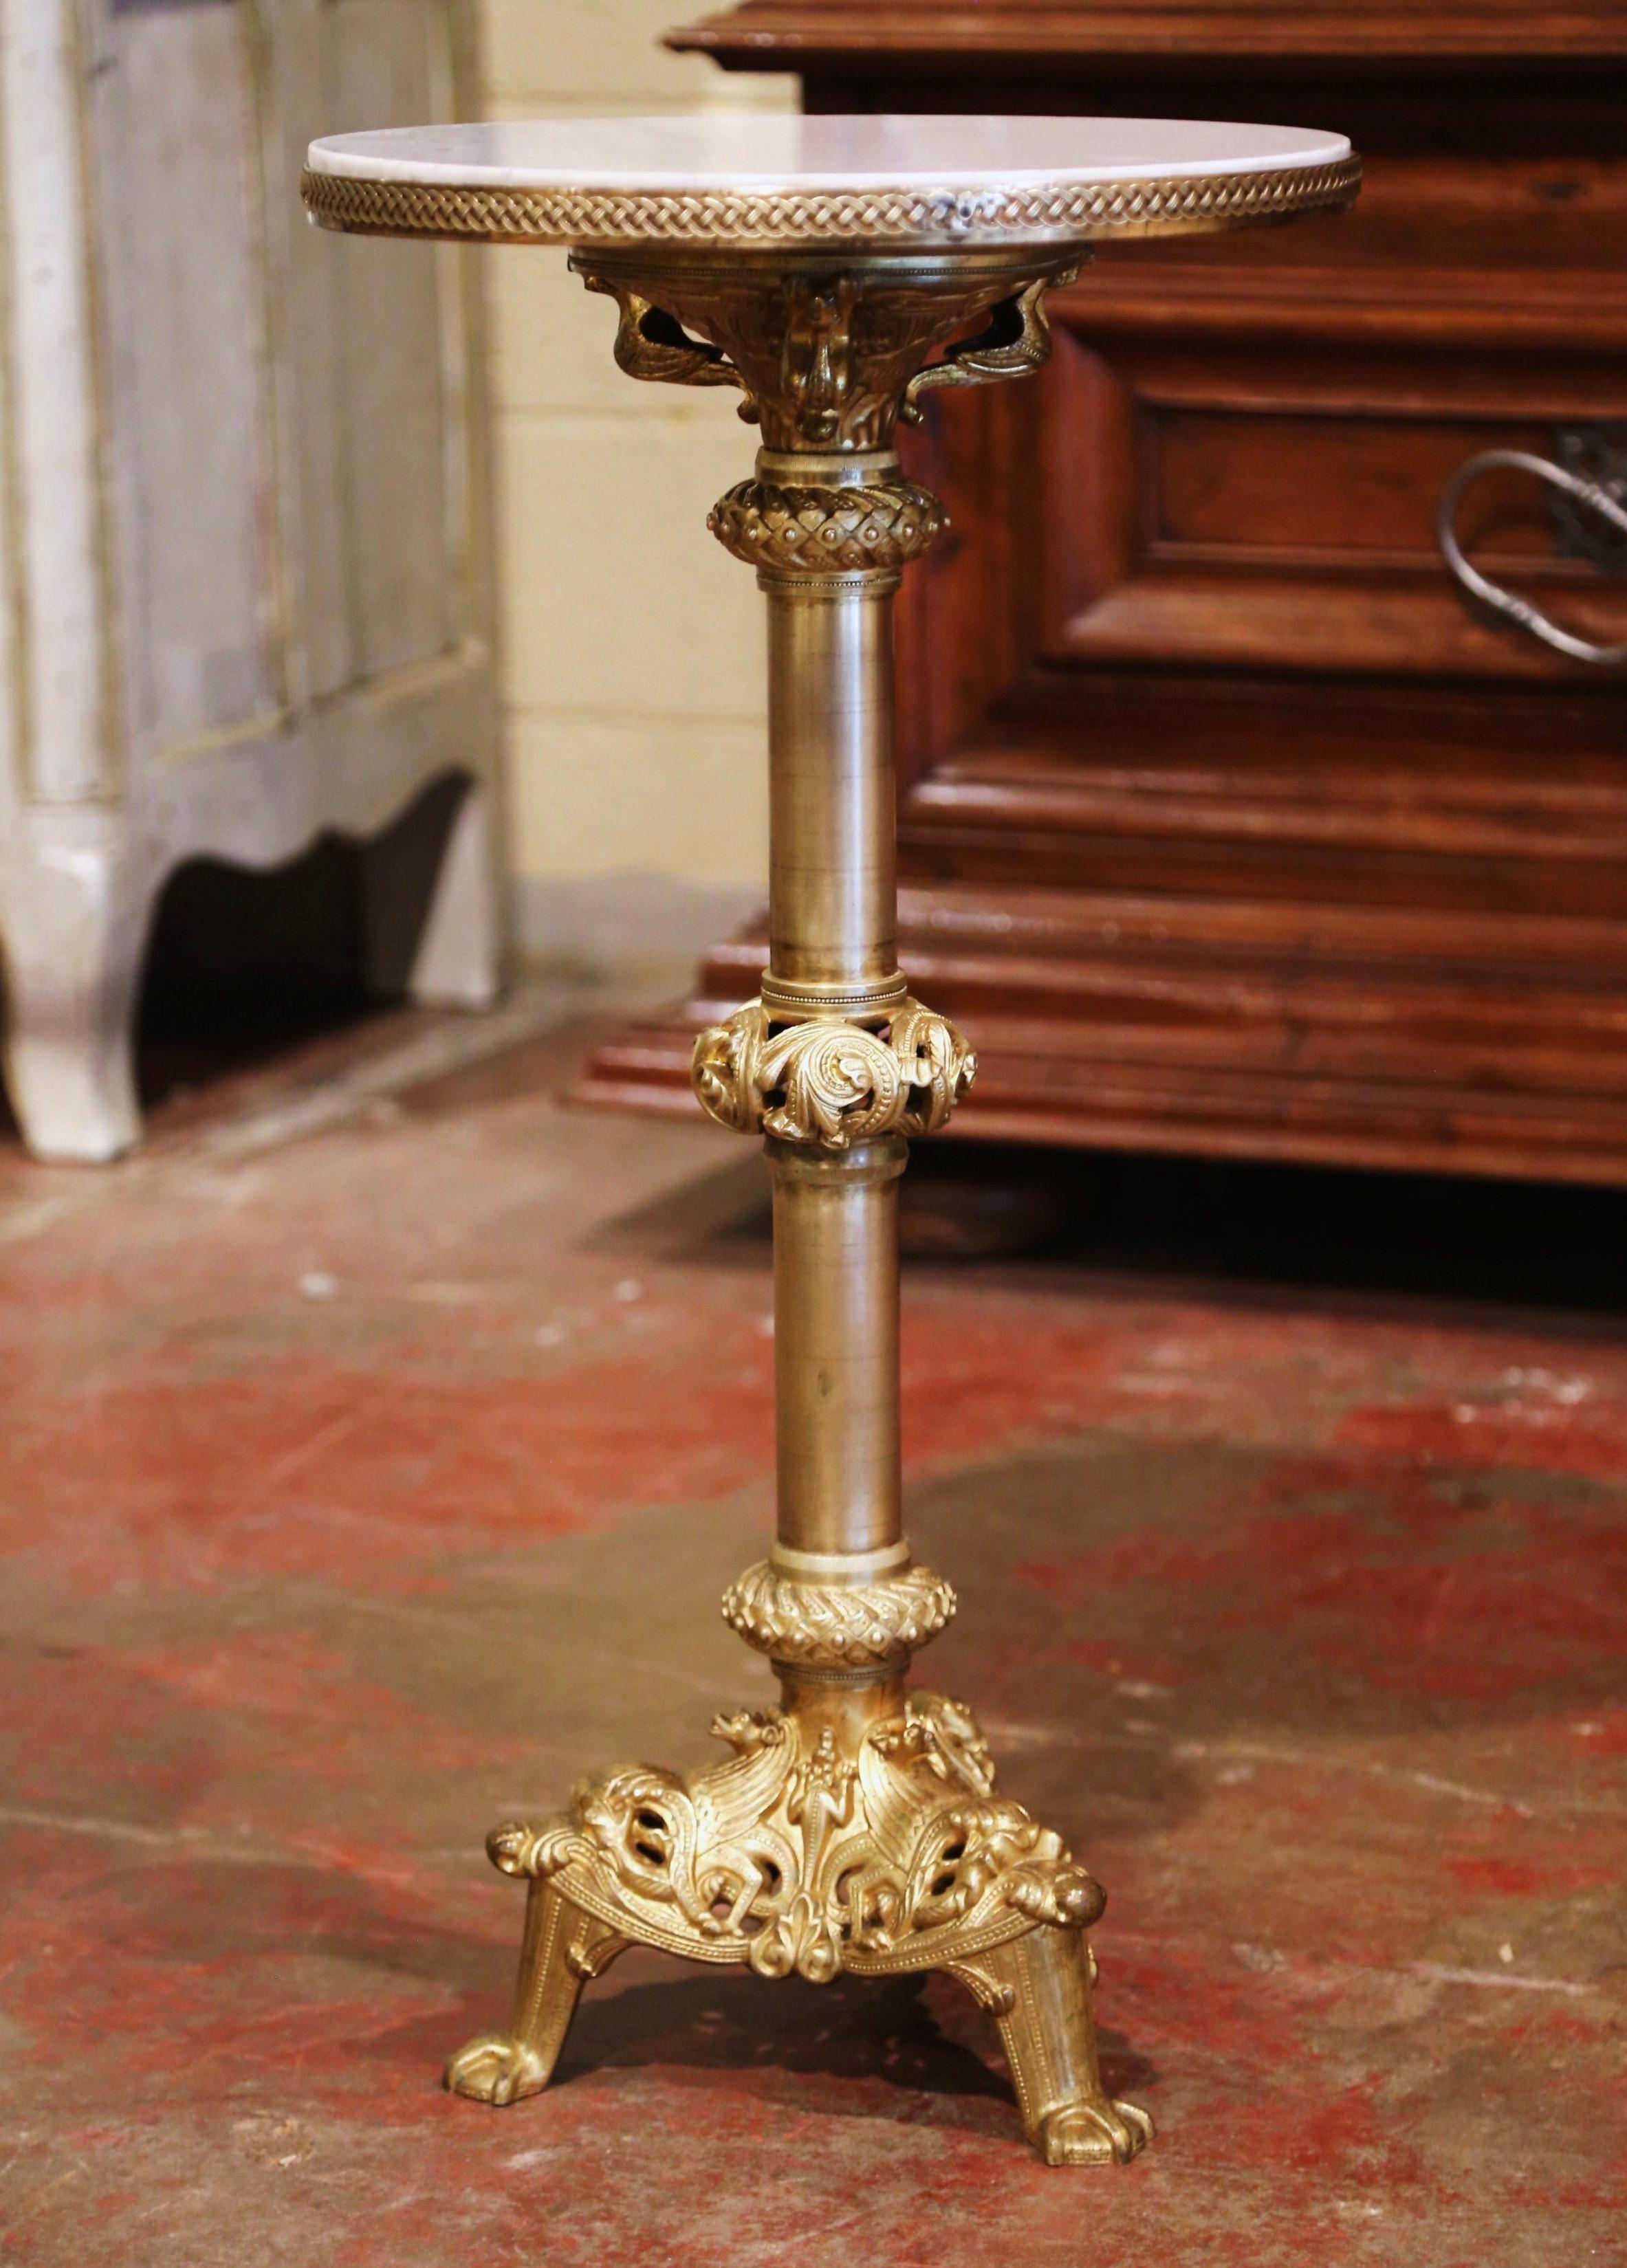 This elegant antique bronze and marble table was created in Paris, France, circa 1880. The pedestal stands on an intricate base ending with three carved paw feet. The round stem is decorated with leaf and foliage motifs over a circular white marble